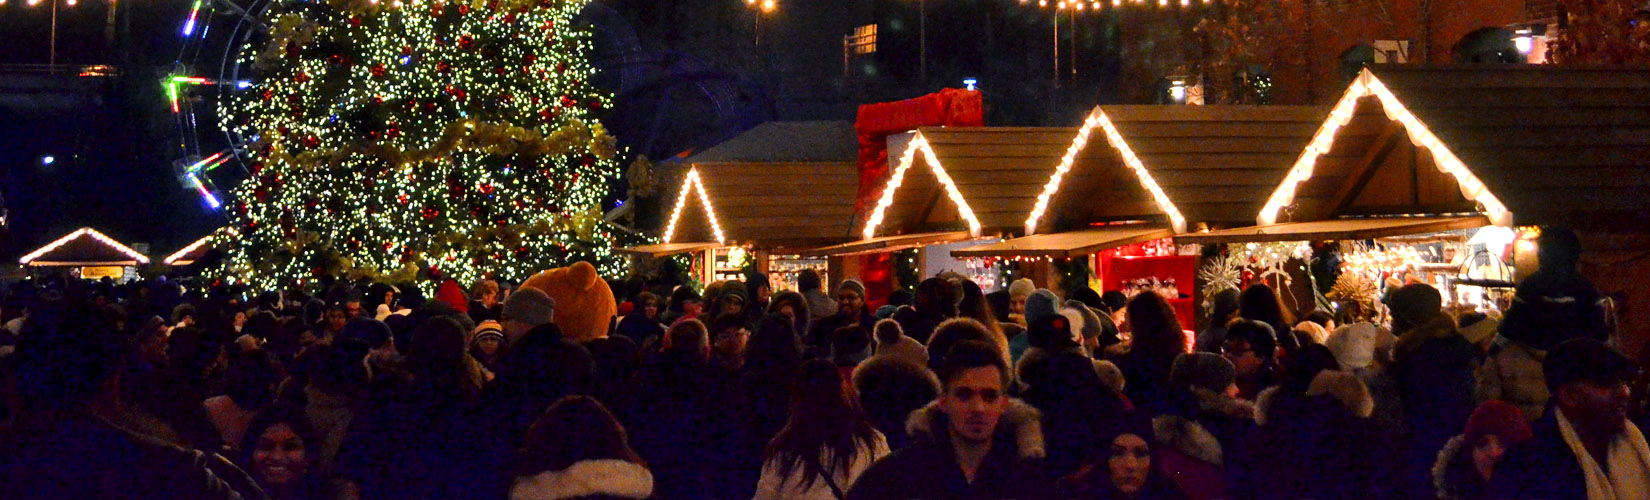 Ontario Christmas Markets Yule Absolutely Adore :: I've Been Bit! A Travel Blog